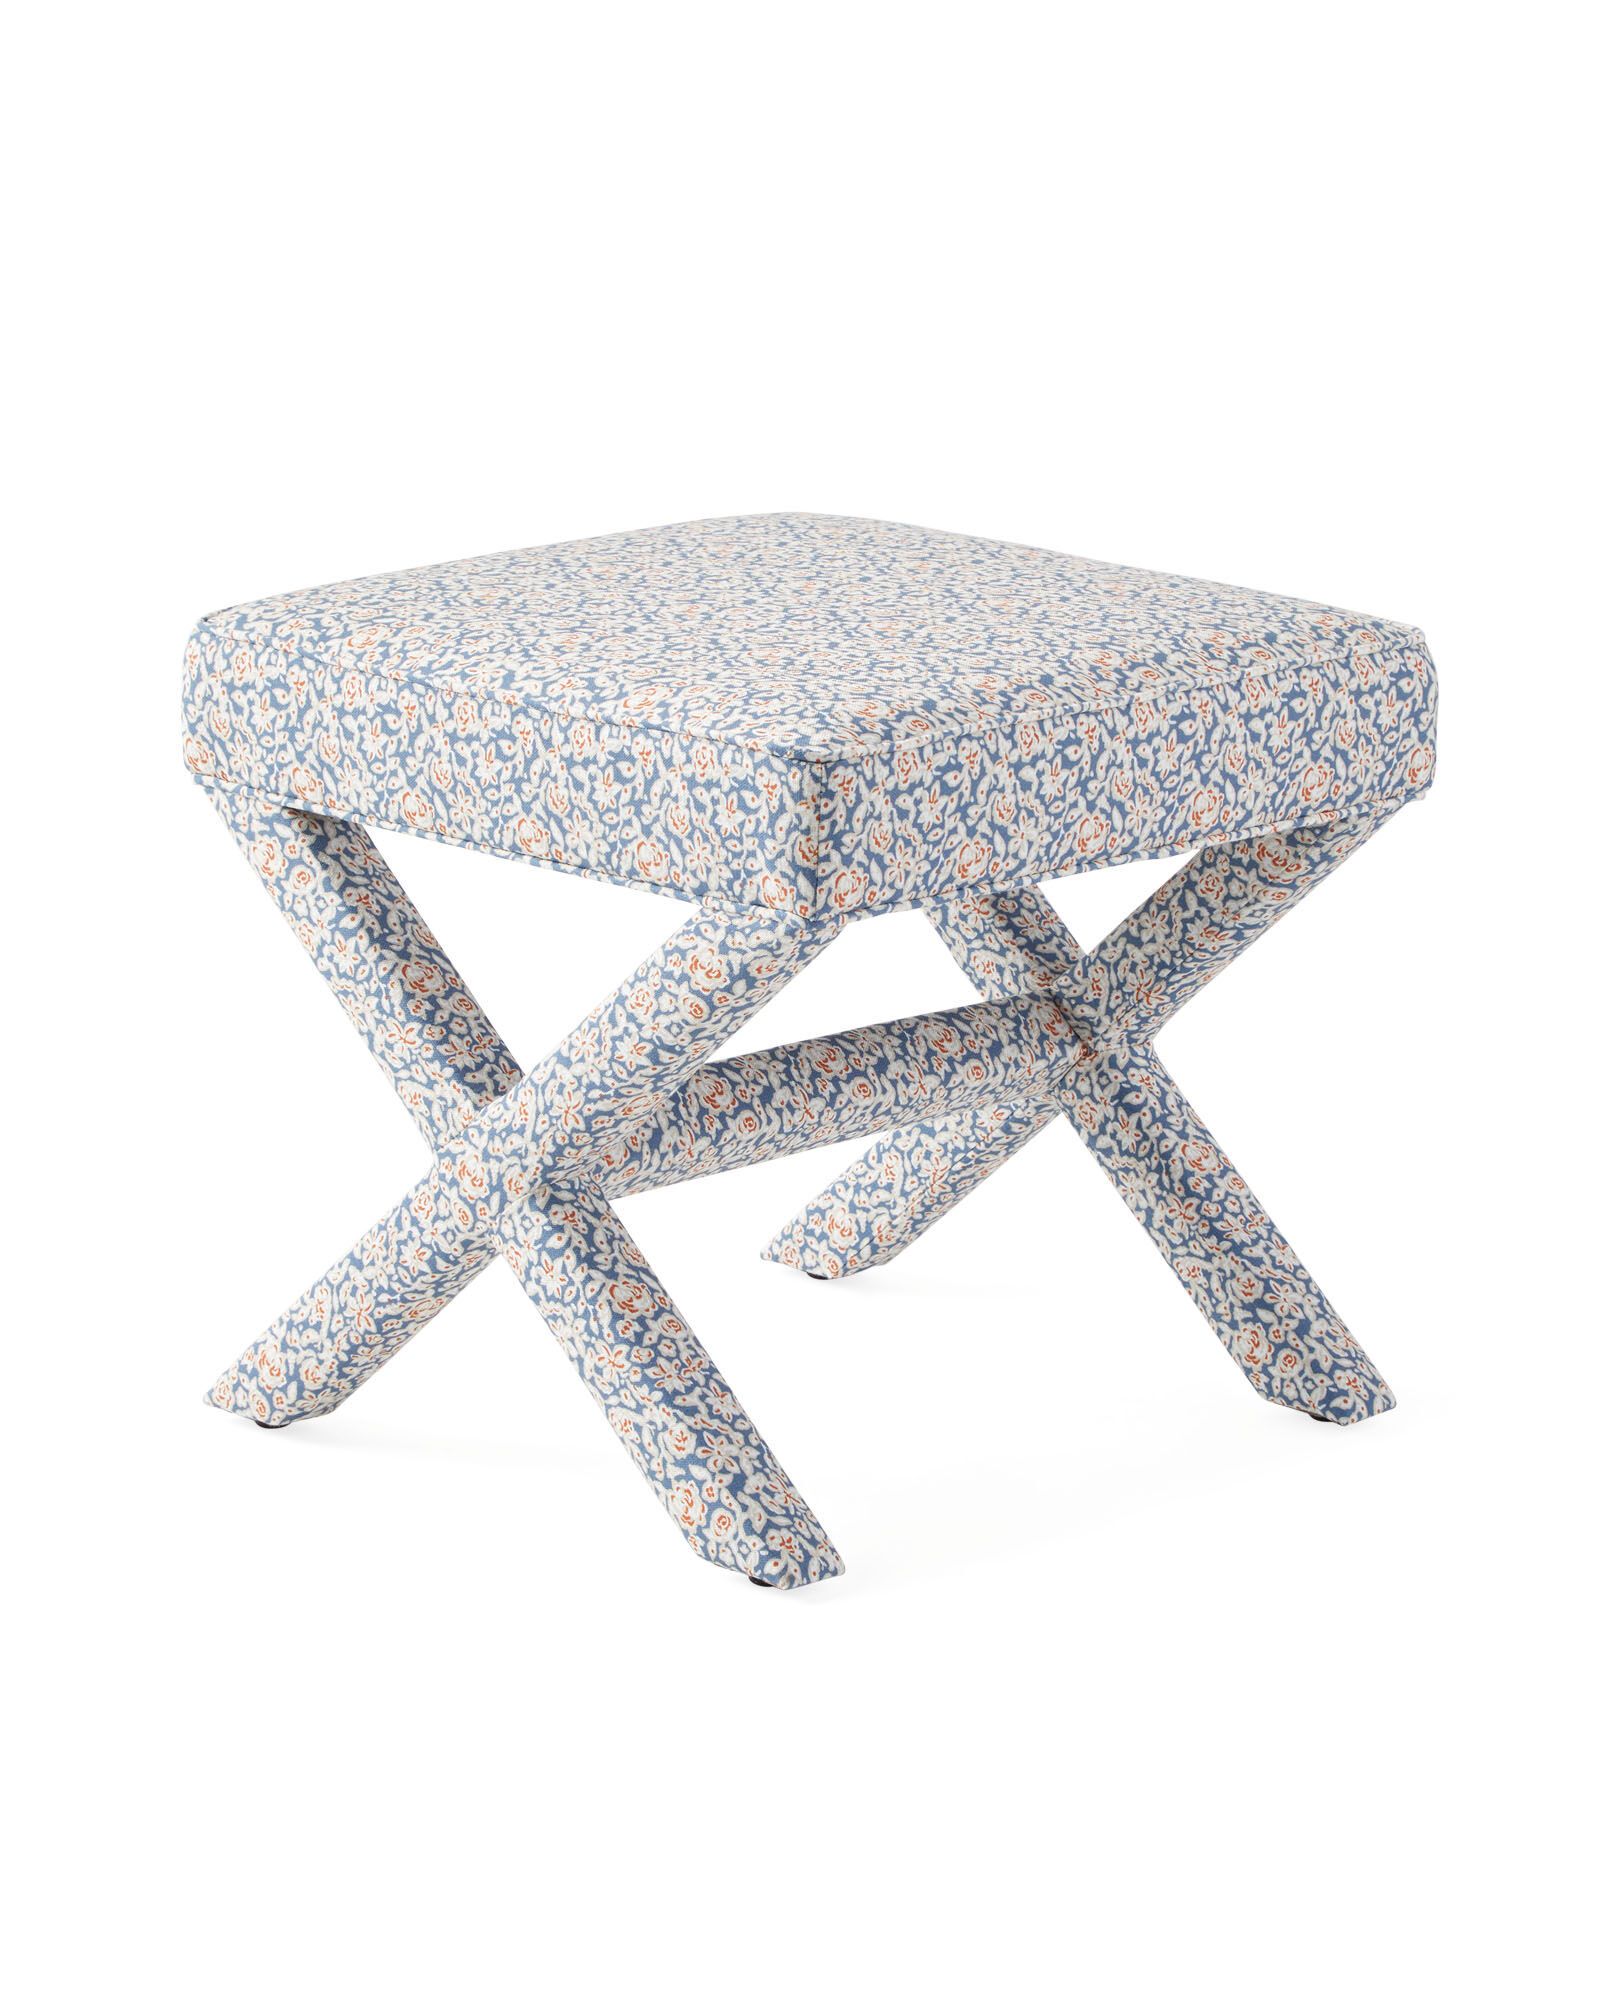 Parker X-Base Stool - Captain's Blue Winslow Linen | Serena and Lily